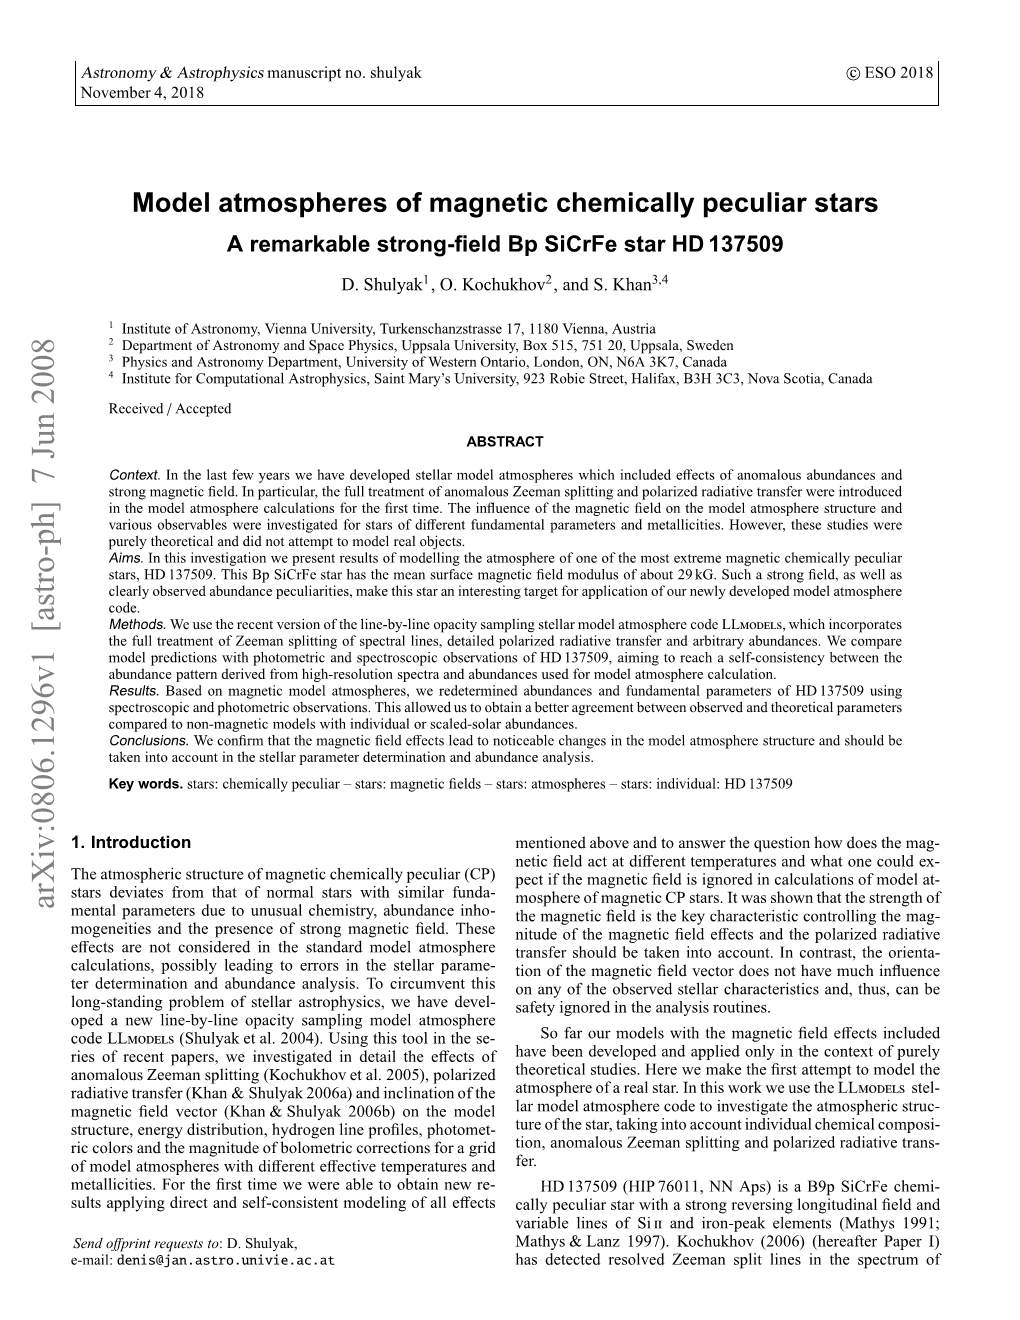 Model Atmospheres of Magnetic Chemically Peculiar Stars. Alecian, G., & Stift, M.J